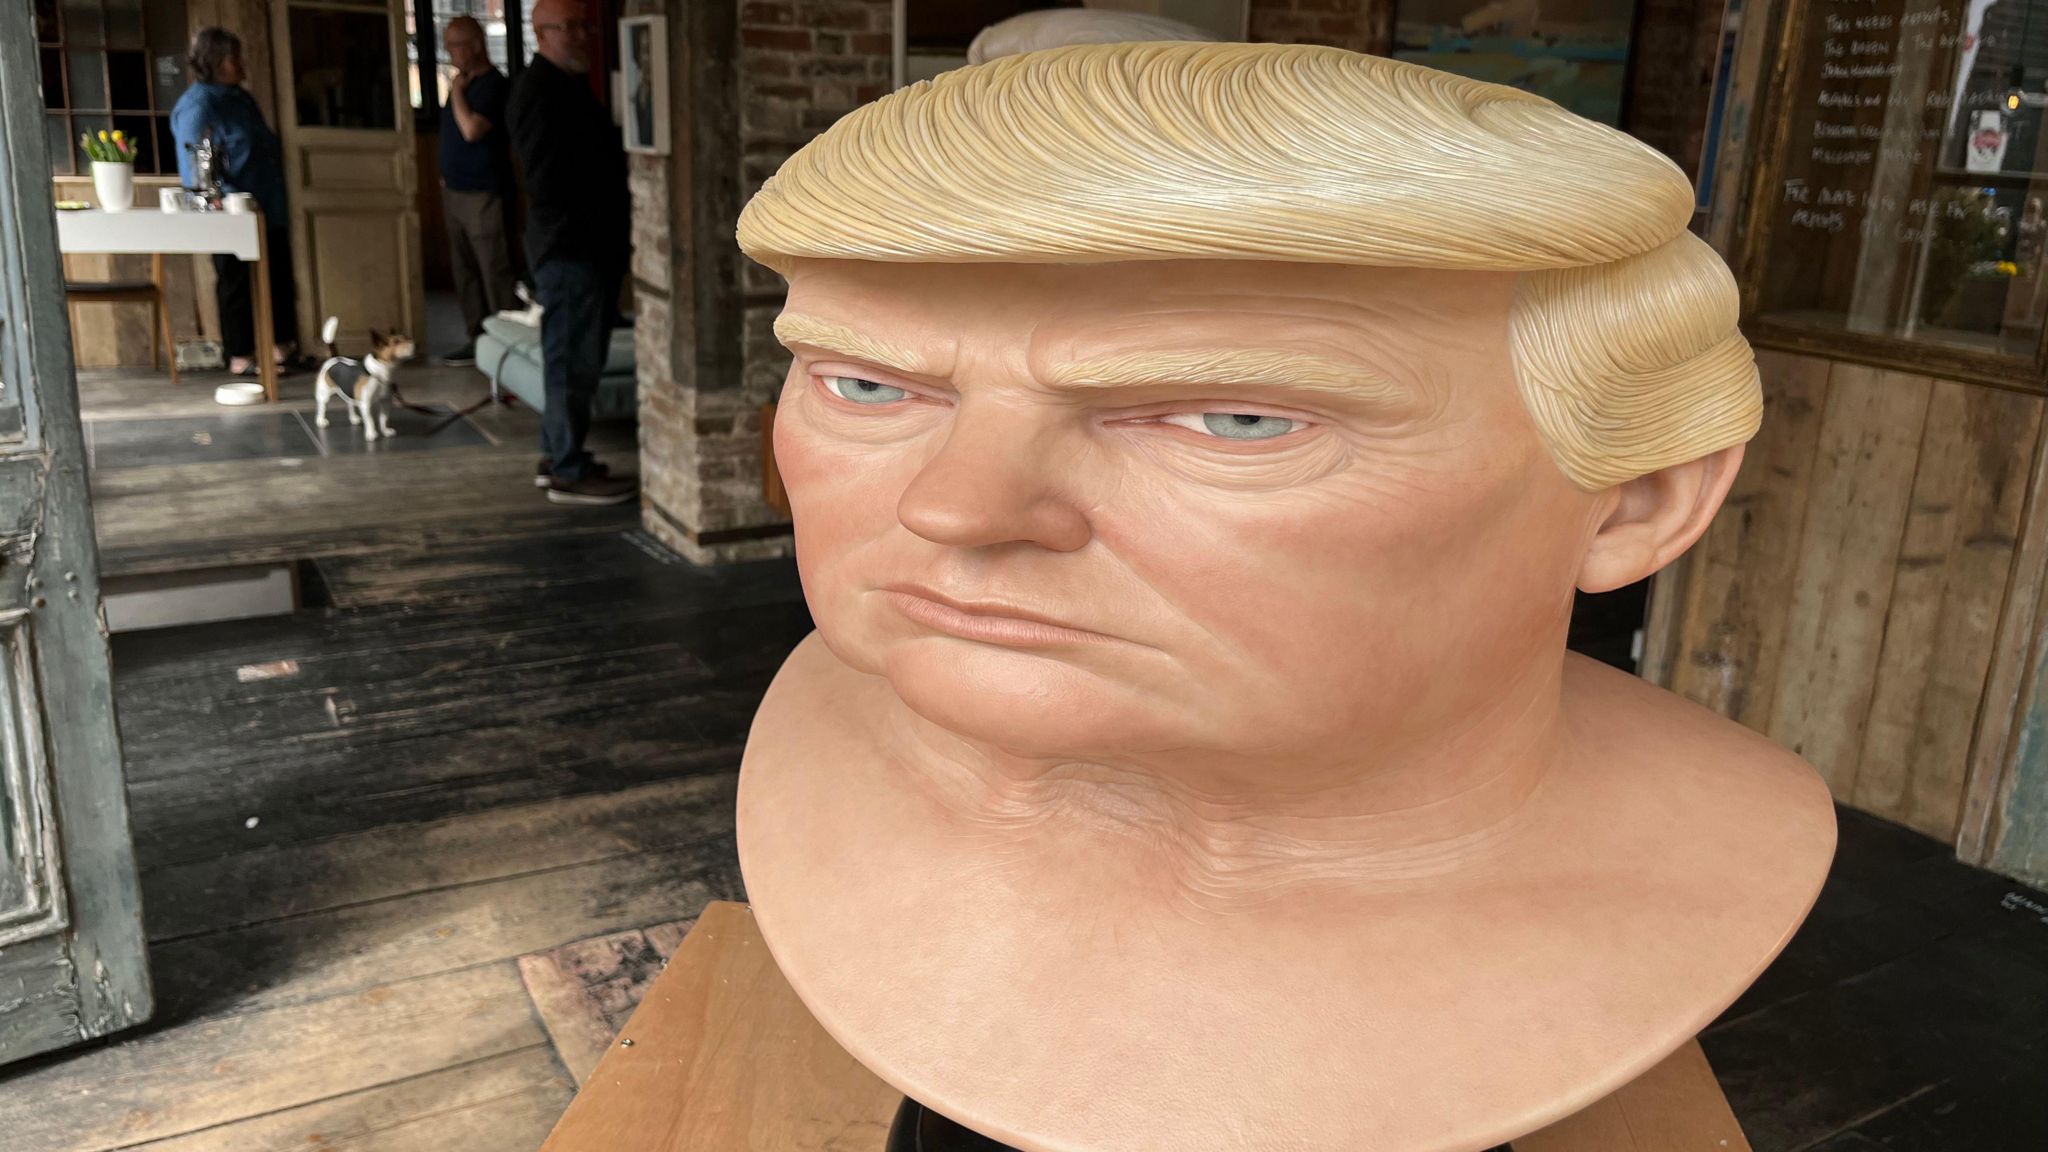 The silicone head of Donald Trump in a room with wooden floorboards